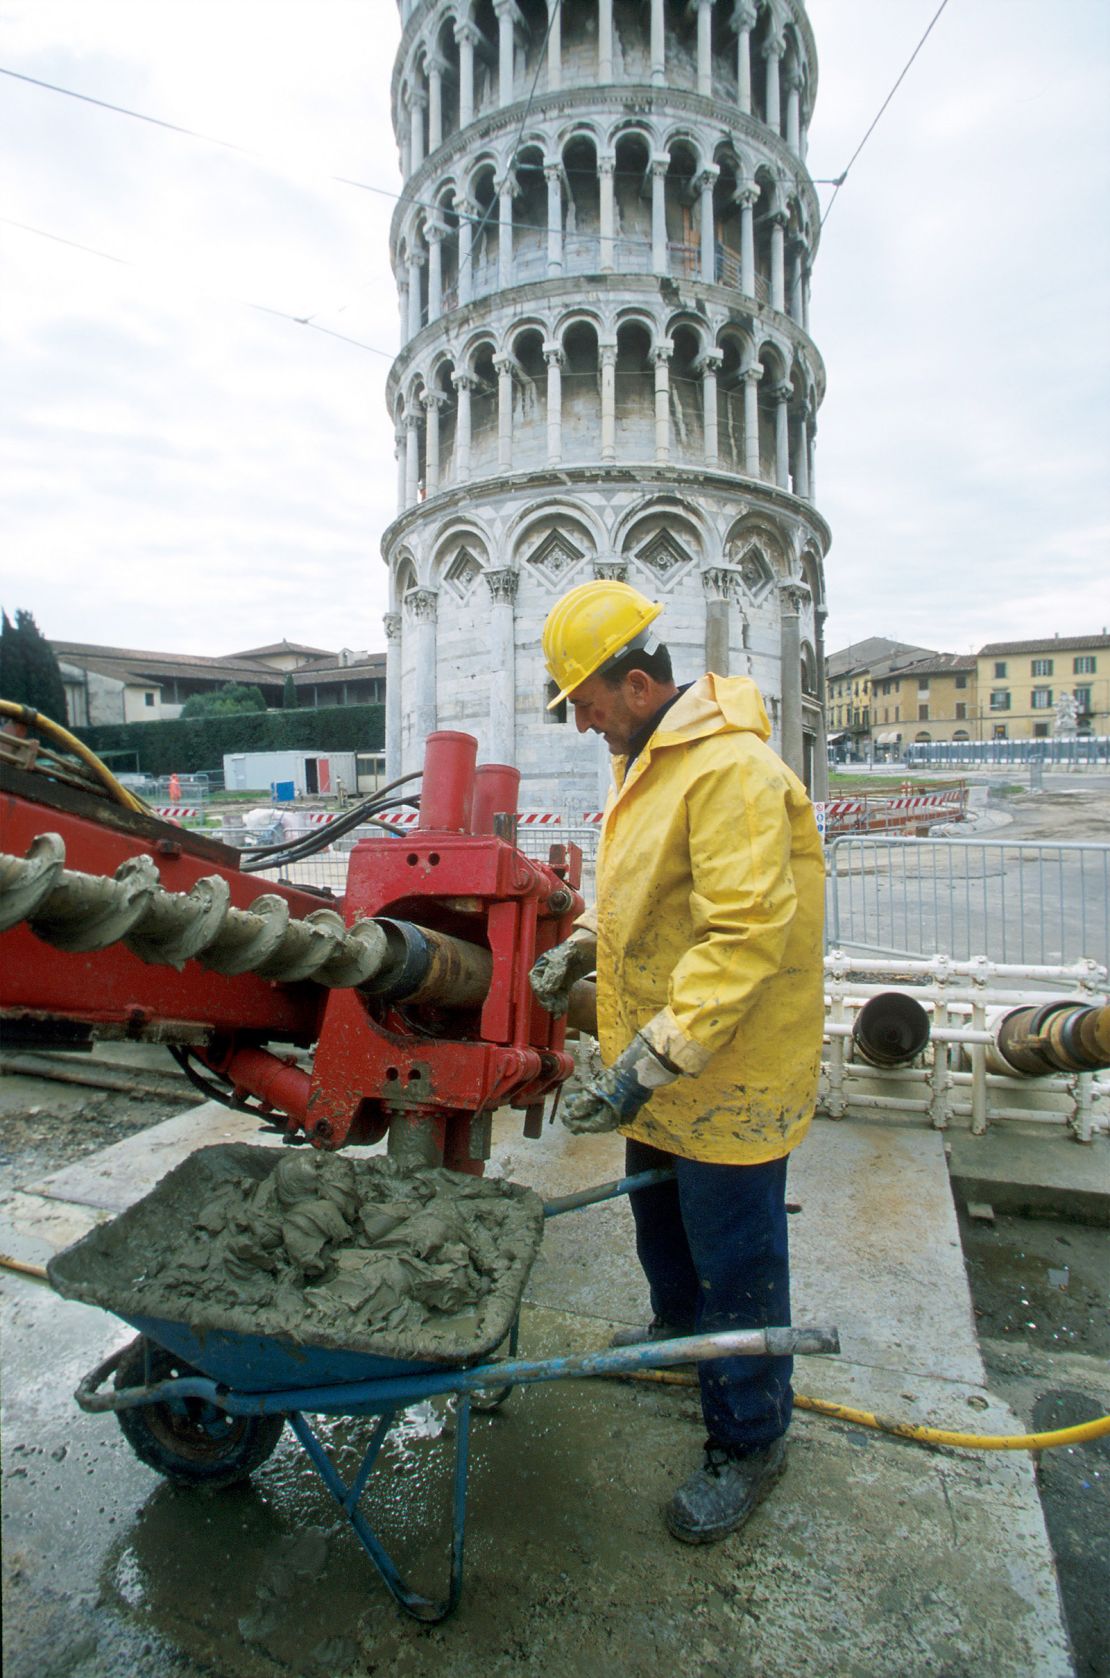 386905 12: A worker takes mud off a special giant drill March 31, 2001 in Pisa, Italy. The drill is making one of 41 holes or perforations into the earth on the north side of the Leaning Tower of Pisa March 2001 in Pisa, Italy to decrease its incline, which tilts south. The Tower, completed in 1370, has been under restoration to secure its foundation and hence closed to visitors since 1990. The restoration will decrease the angle of the tower's incline by 1/2 degree, bringing it back to the position it held 3 centuries ago. It is scheduled to re-open June 16, 2001. (Photo by Giulio Andreini/Liaison)